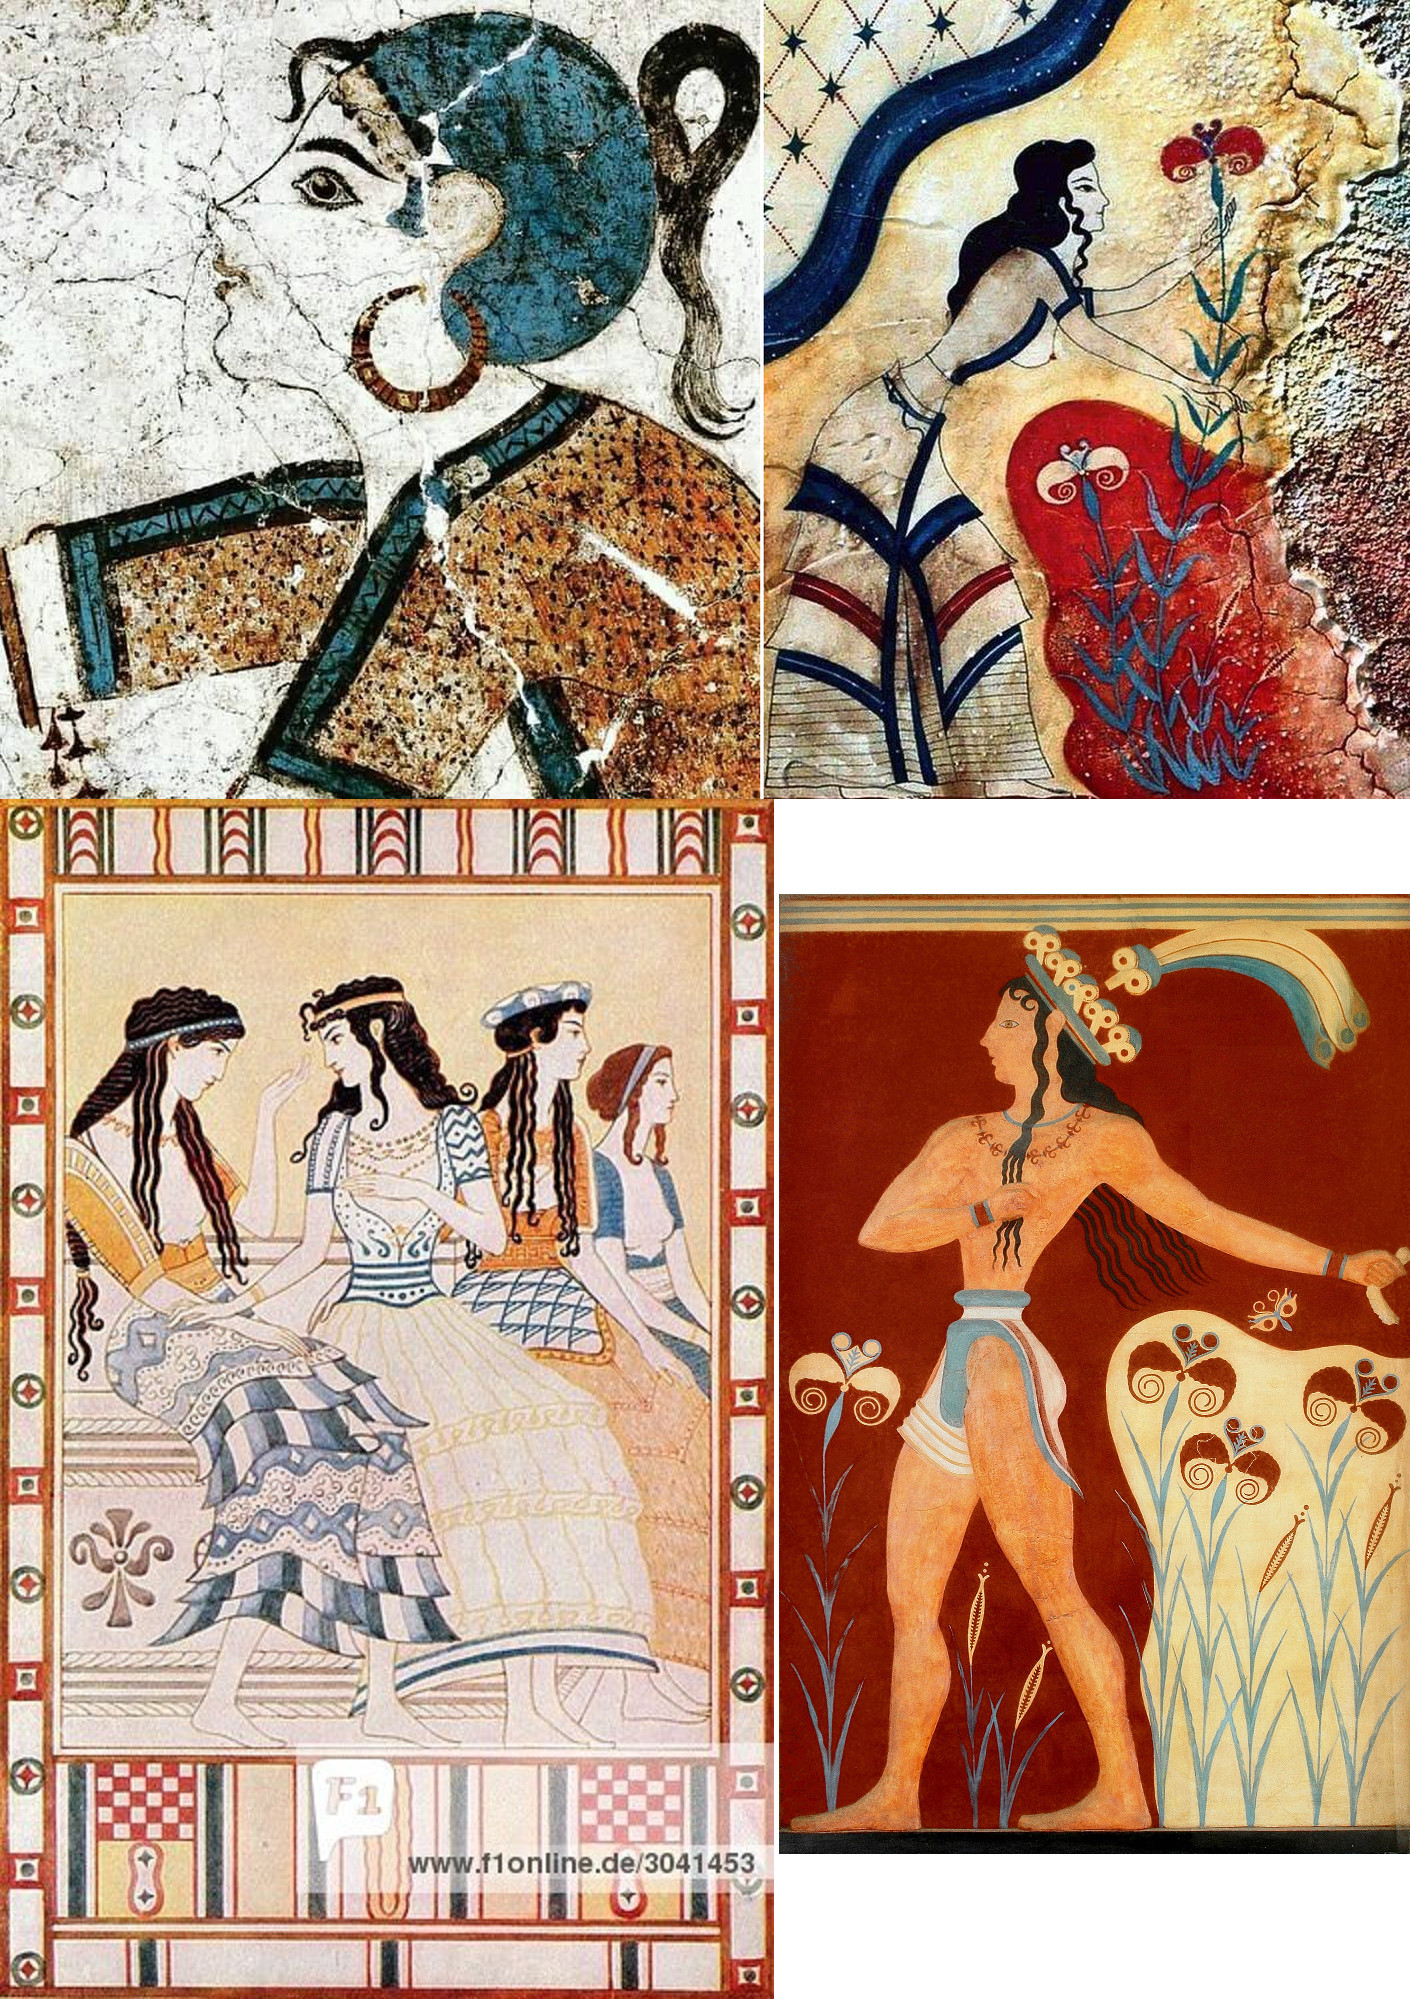 Minoan frescoes - Southern European Late EEF peoples.Tanned men and extremely pale women  were...jpg